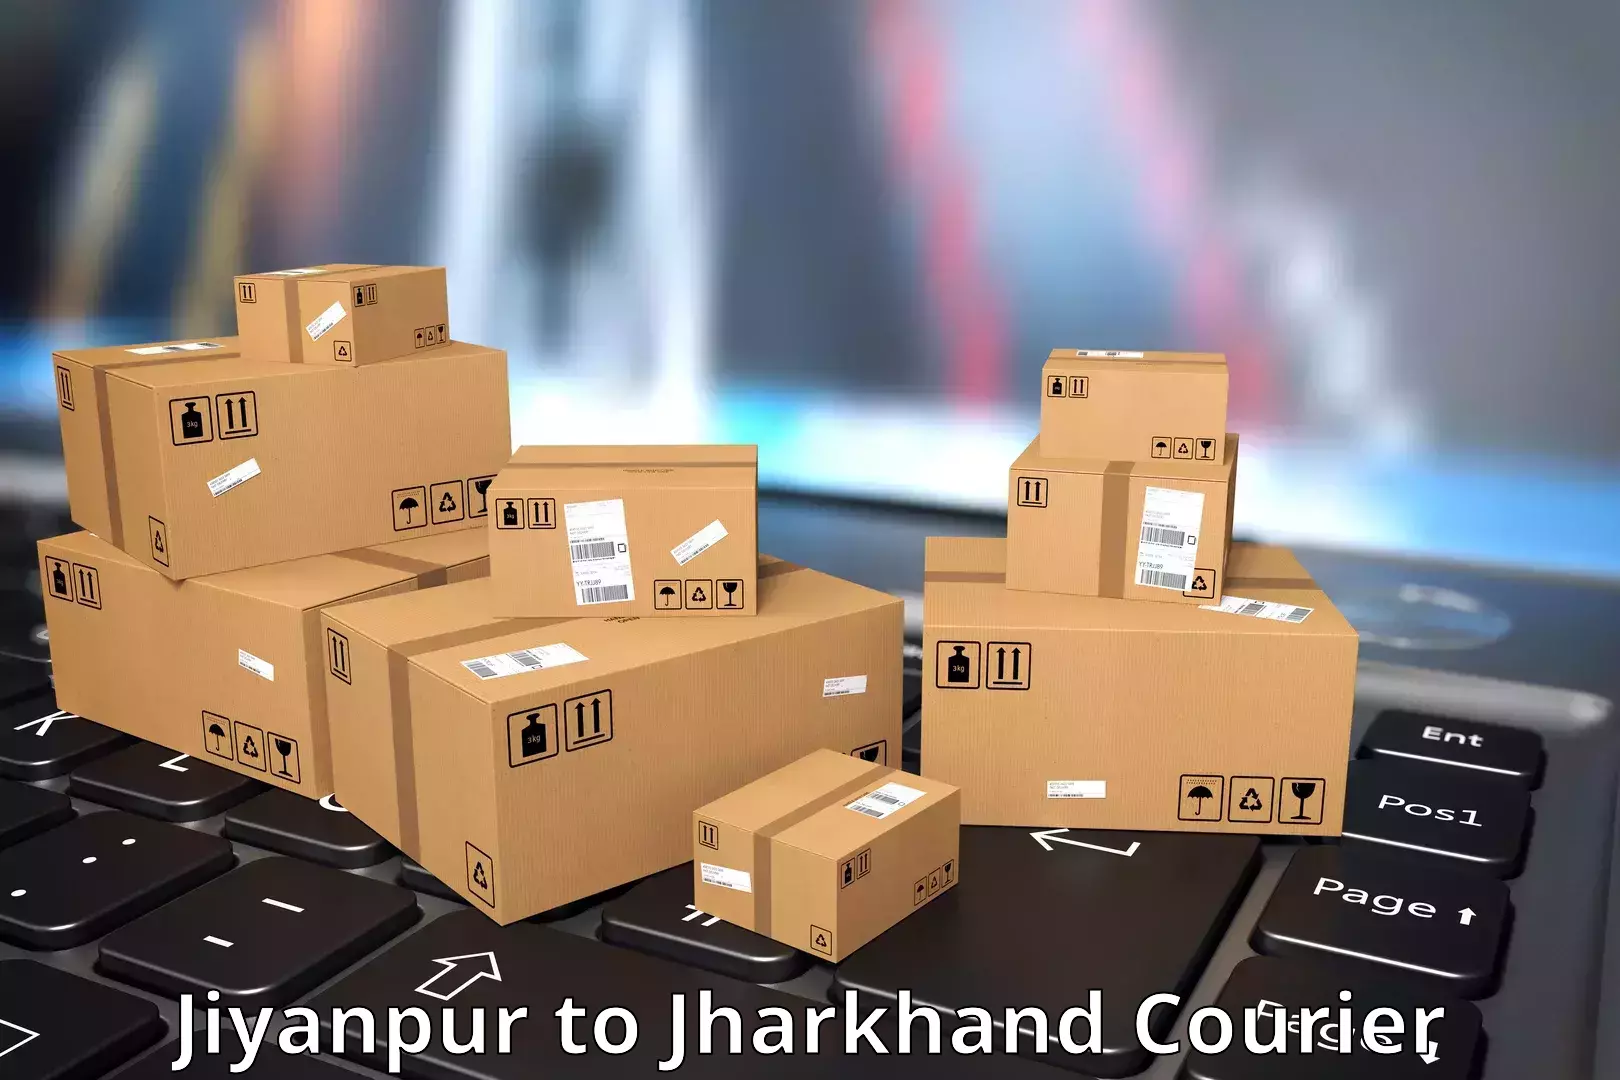 Air courier services in Jiyanpur to Jharia